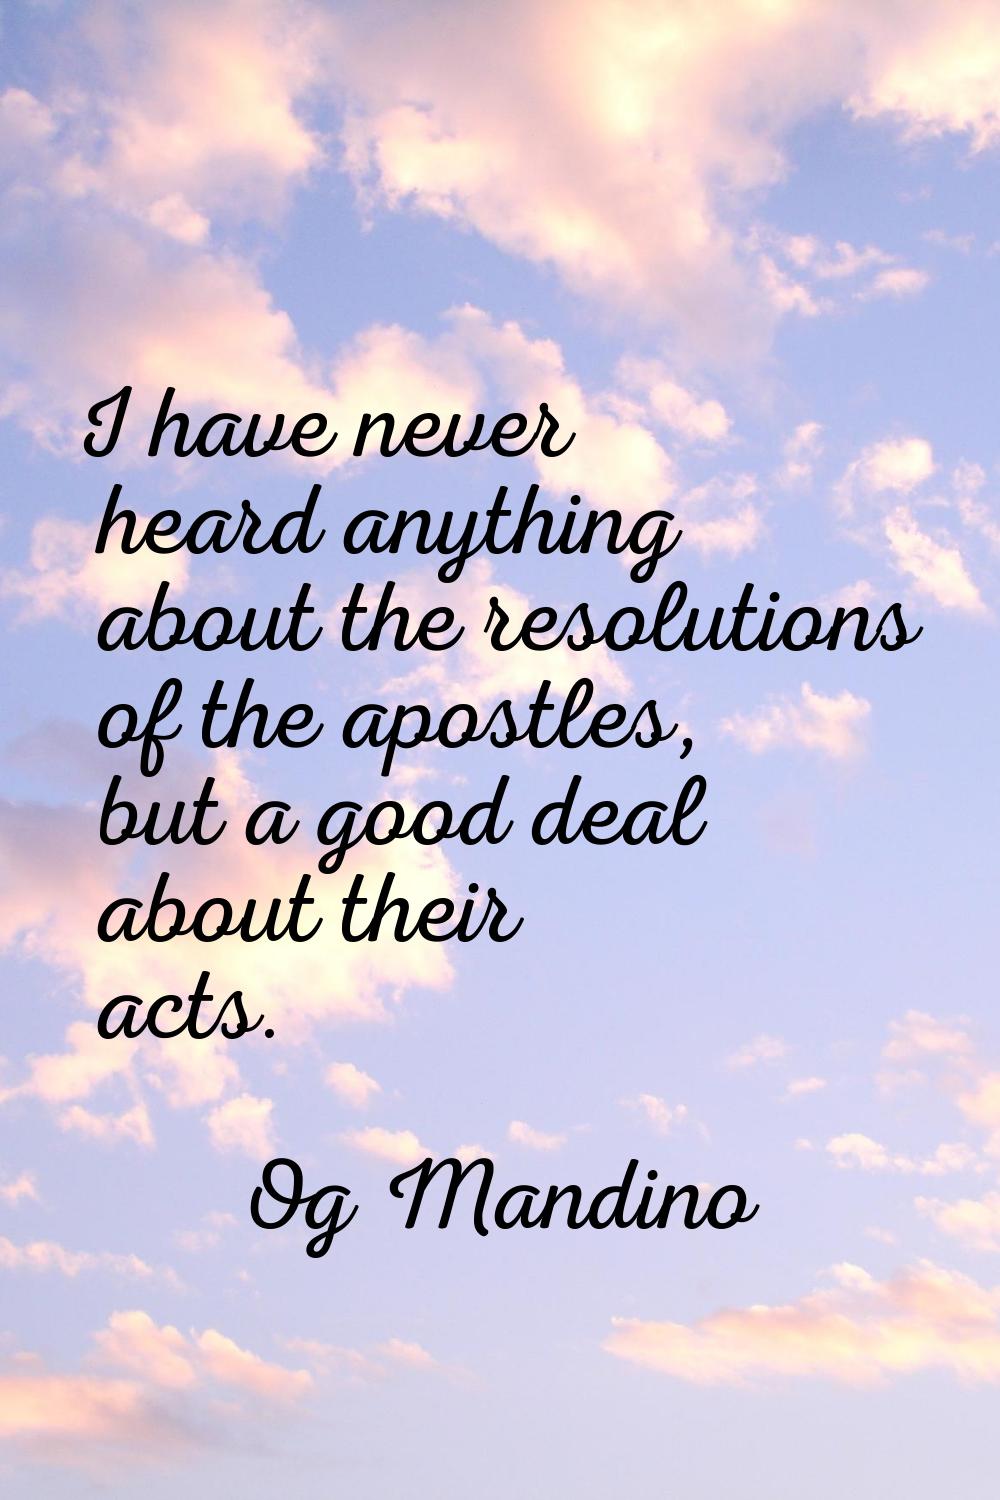 I have never heard anything about the resolutions of the apostles, but a good deal about their acts